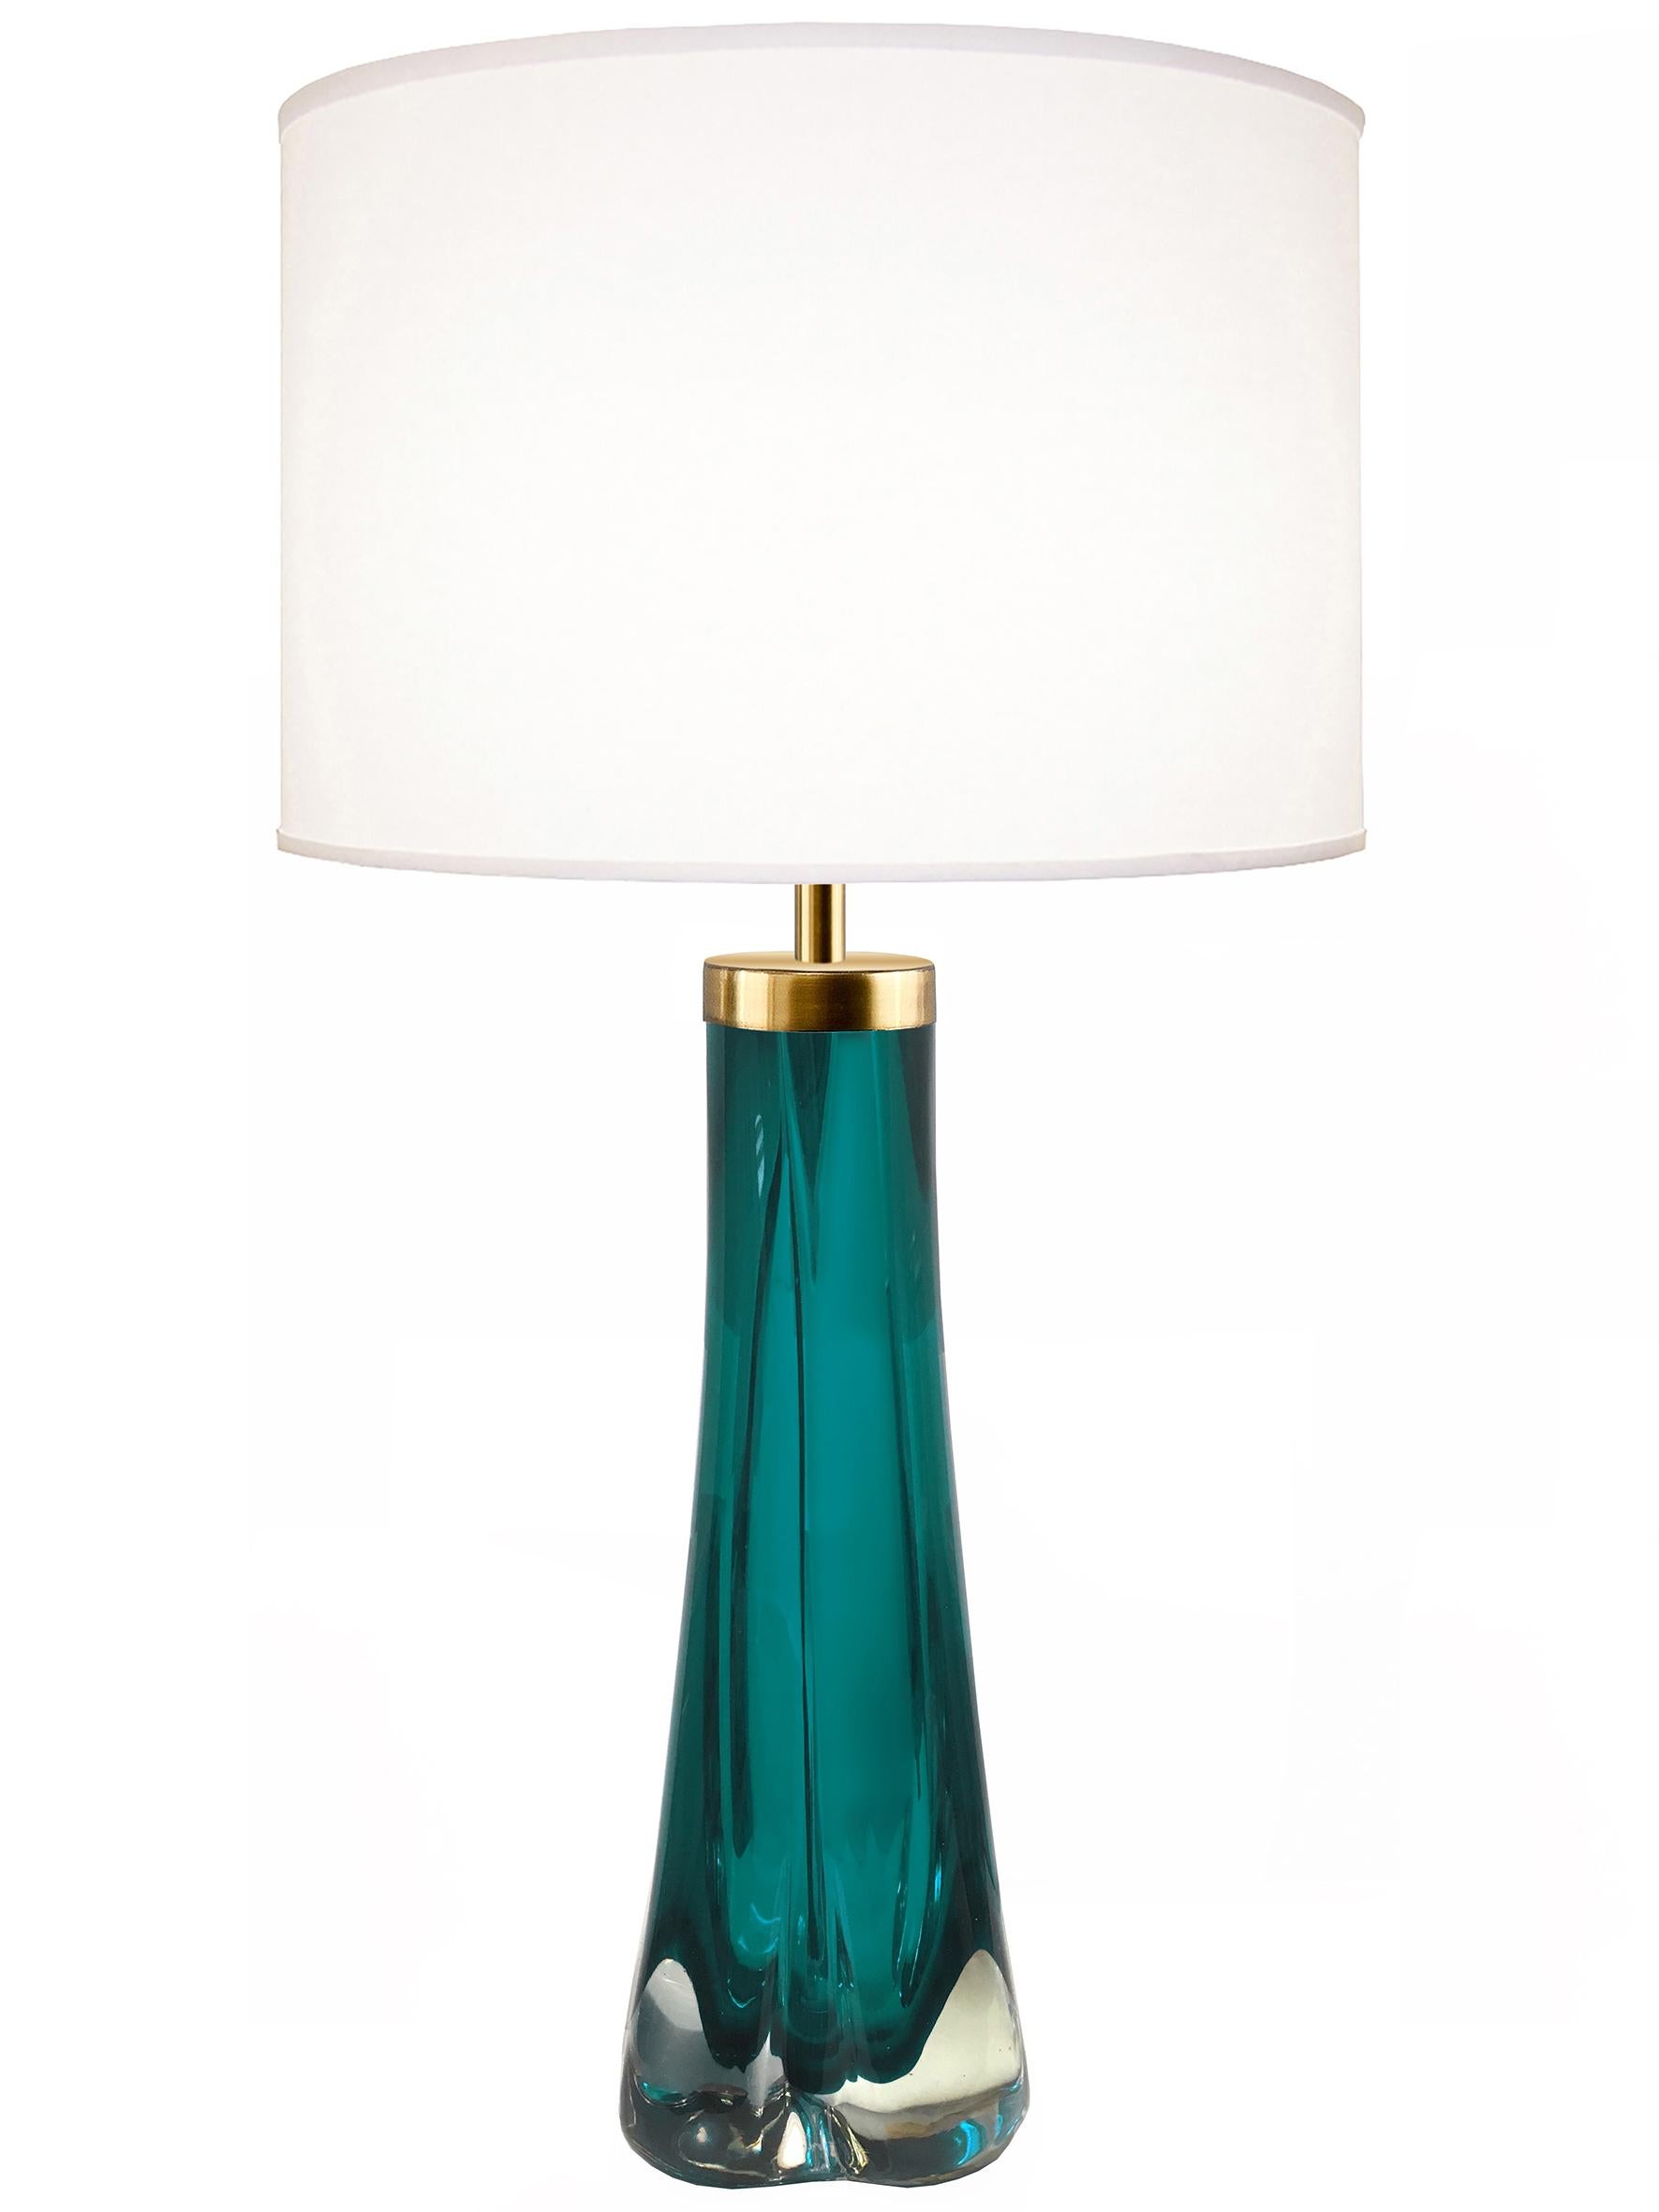 Italian Pair of Thick Cased Aqua Glass Lamps from Craig Van Den Brulle to Order For Sale